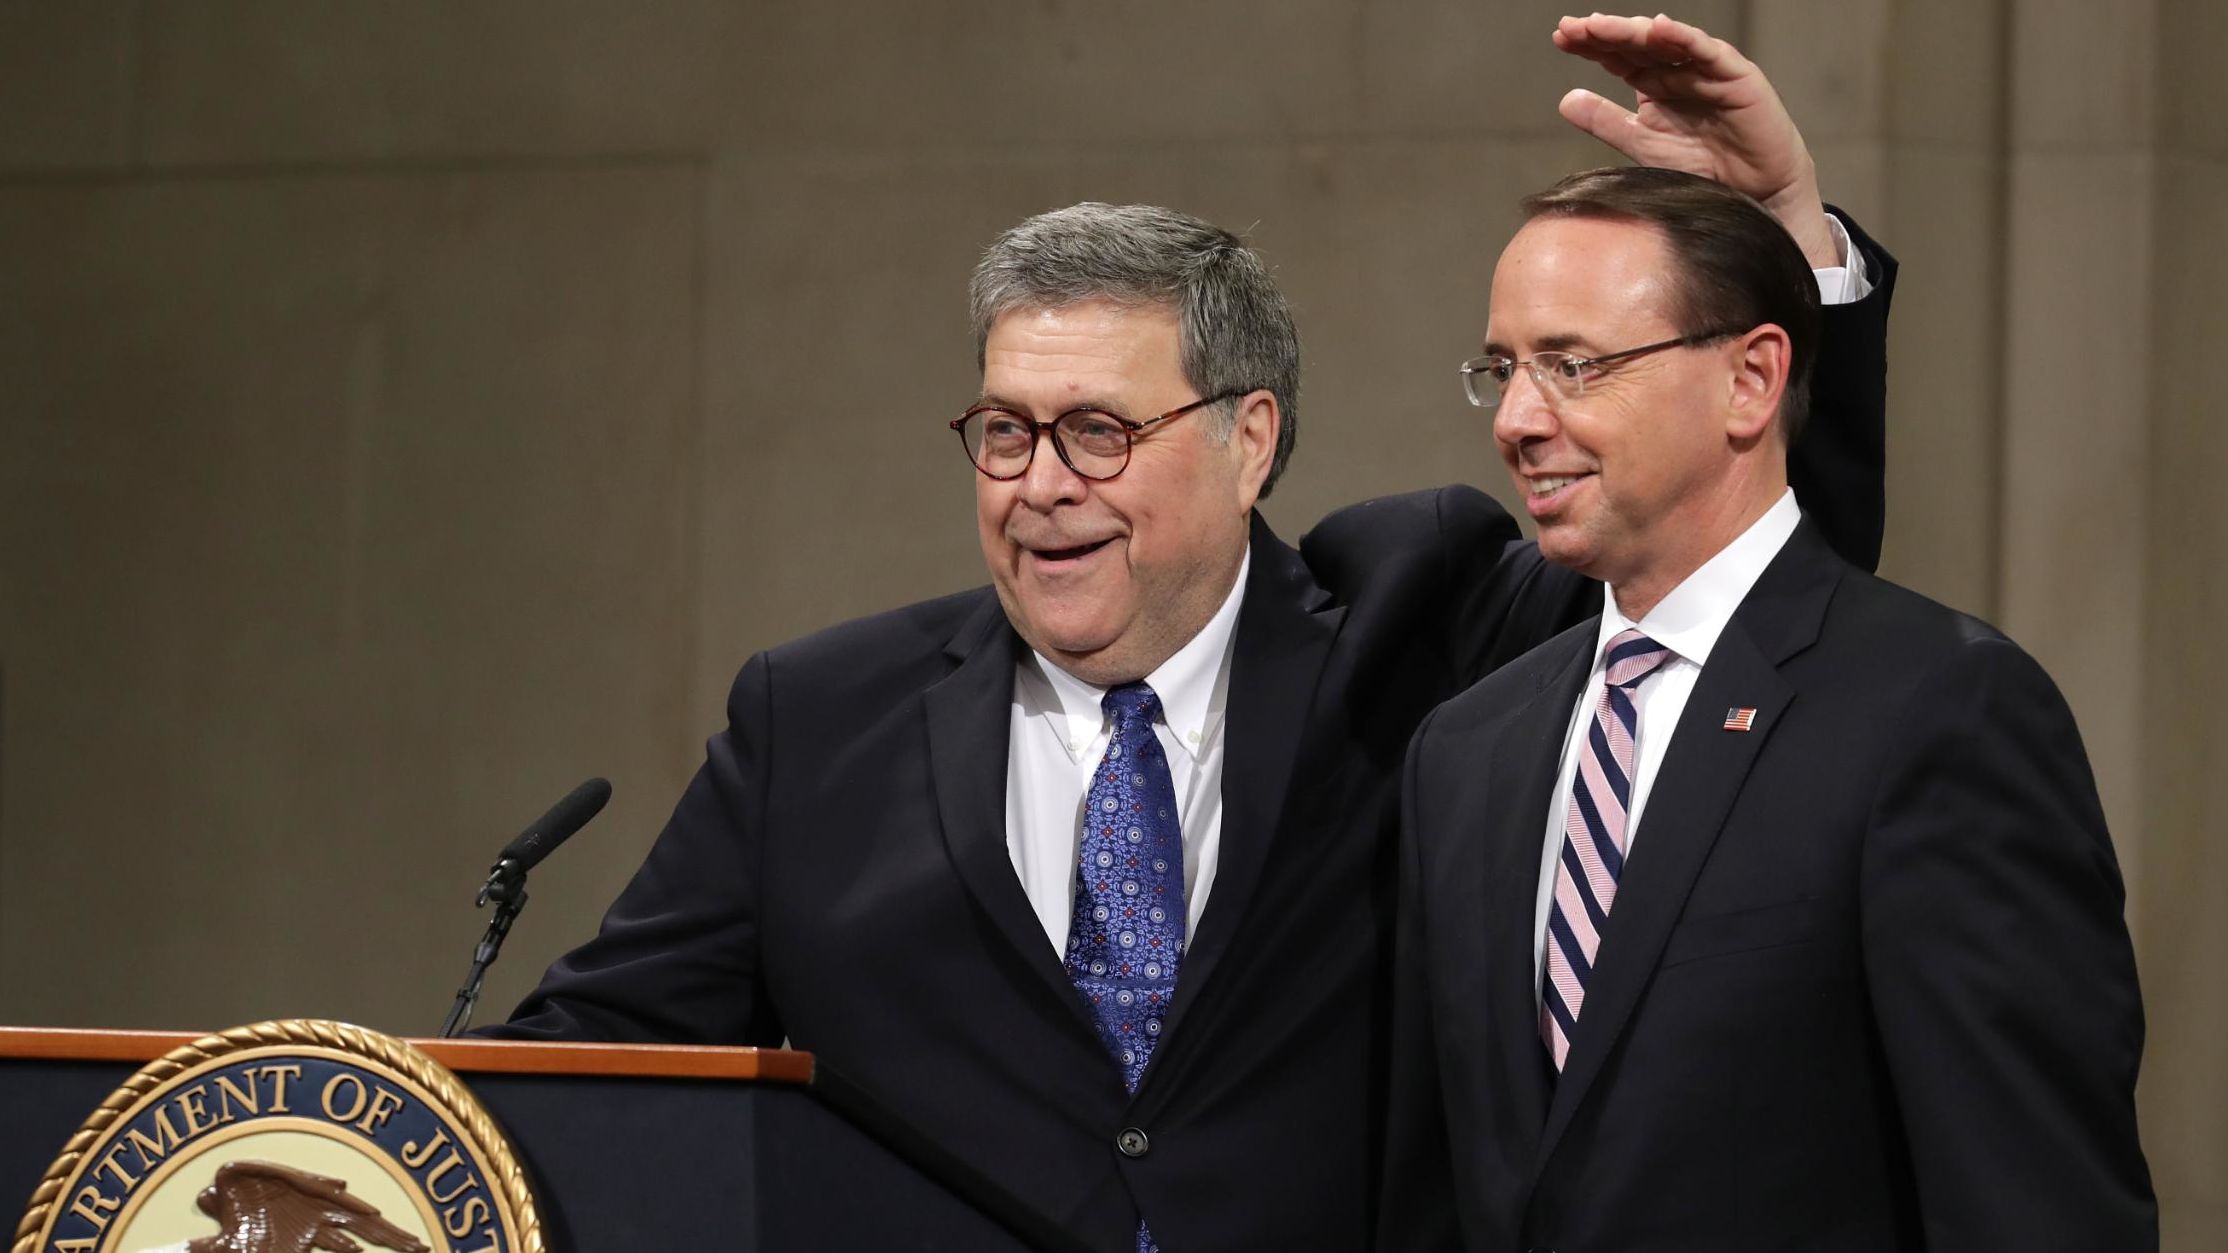 U.S. Attorney General William Barr jokes with Deputy Attorney General Rod Rosenstein on May 09, 2019 in Washington, DC. (Photo by Chip Somodevilla/Getty Images)